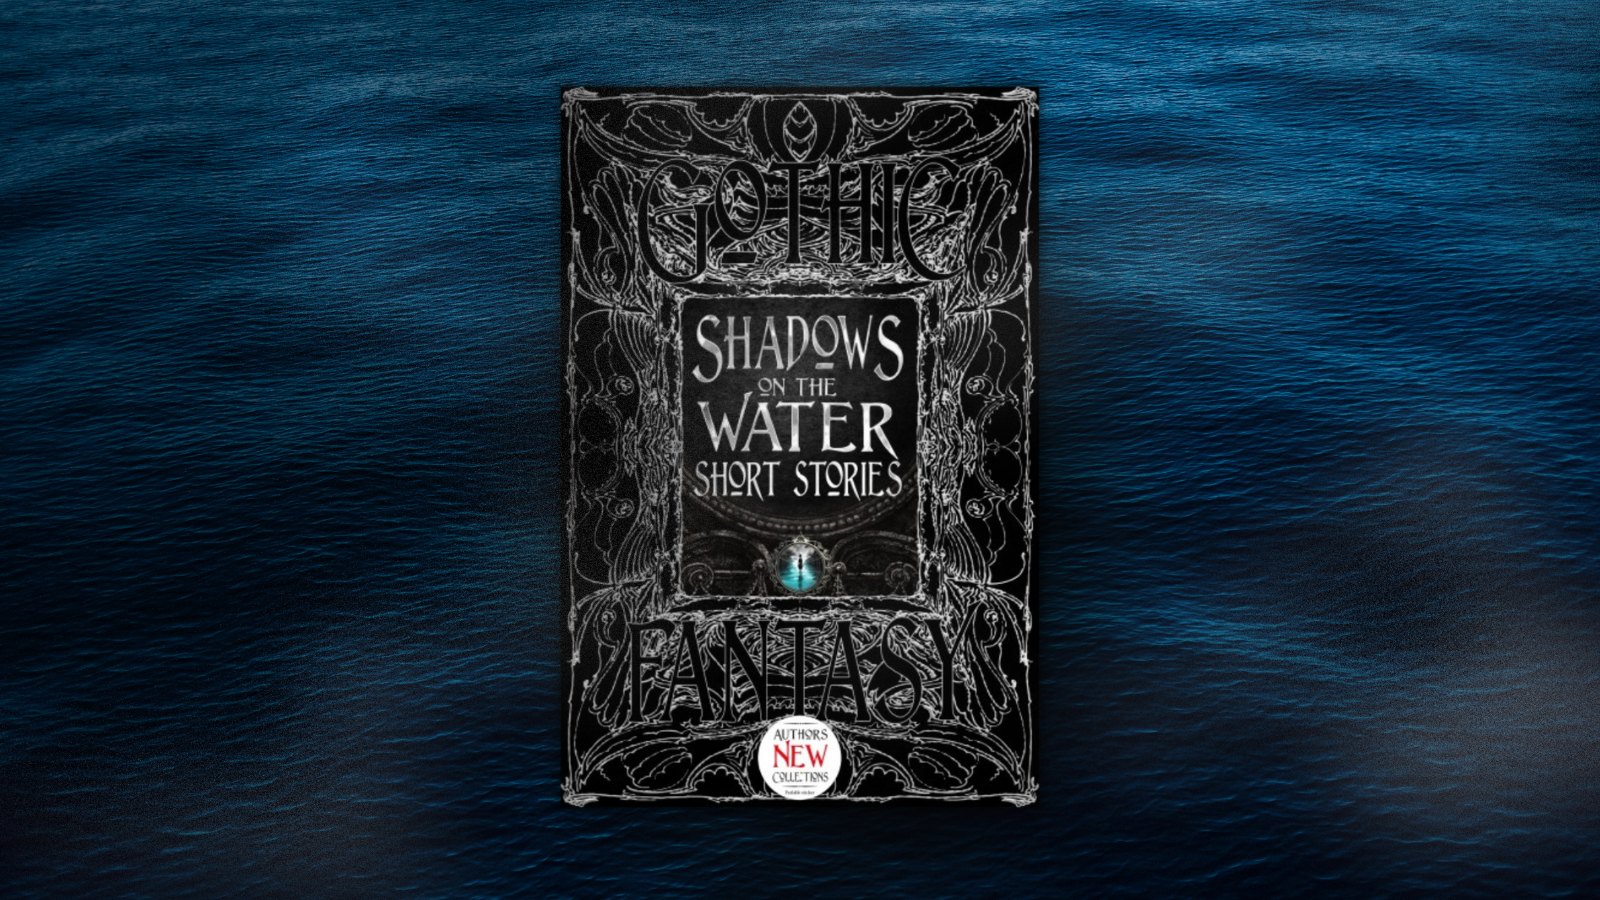 Shadows on the water gothic fantasy short stories flame tree publishing